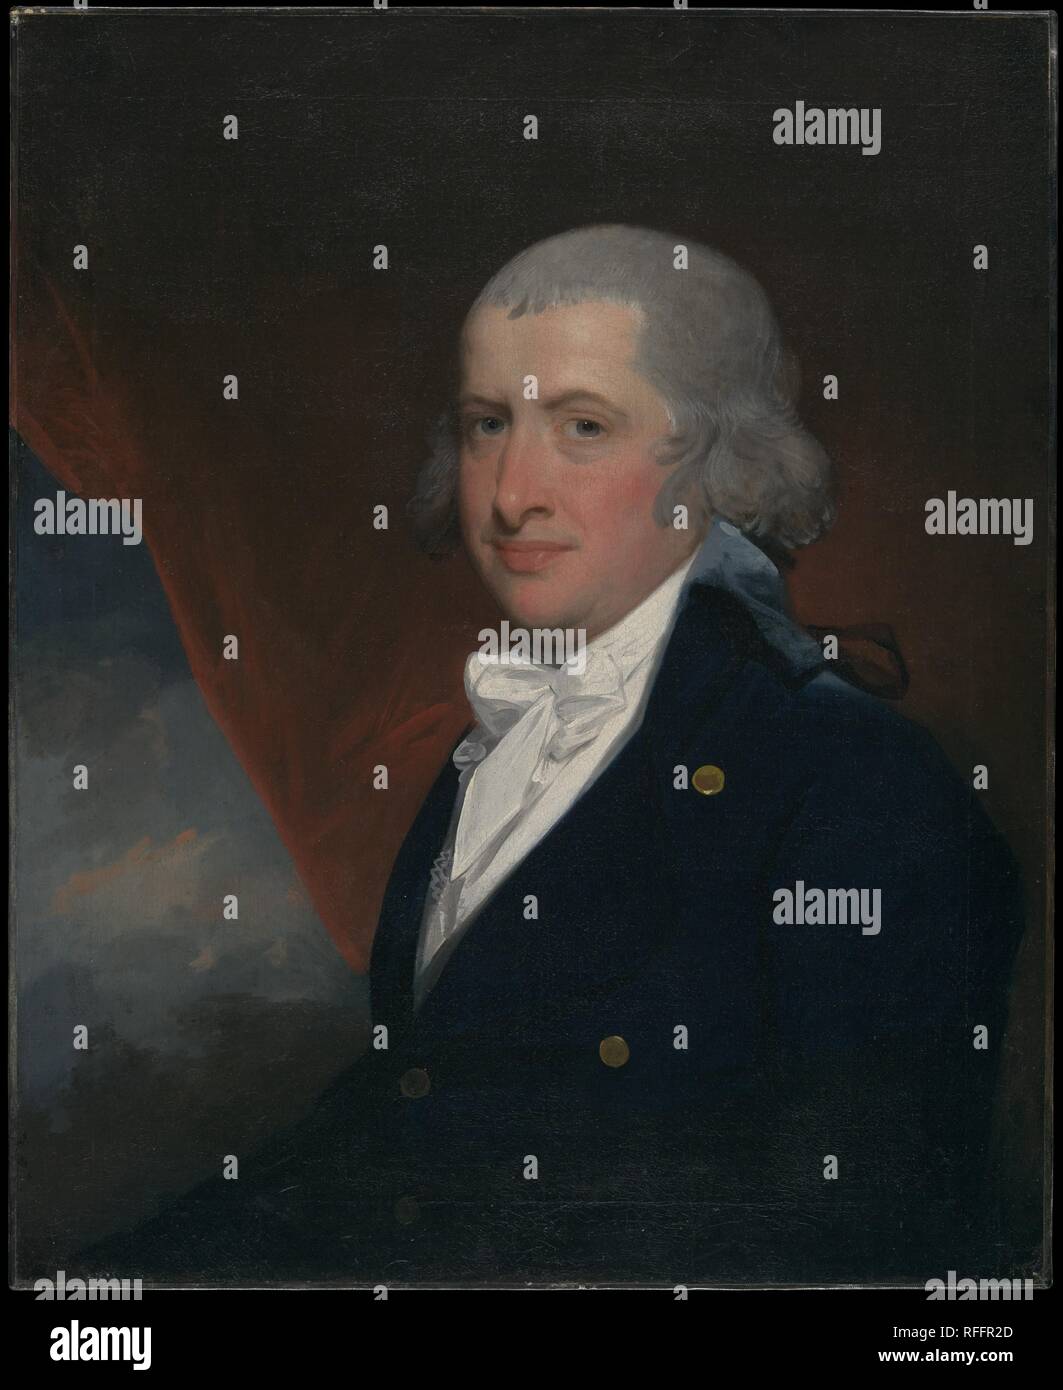 Joseph Anthony Jr. Artist: Gilbert Stuart (American, North Kingston, Rhode Island 1755-1828 Boston, Massachusetts). Dimensions: 30 x 24 1/2 in. (76.2 x 62.2 cm). Date: ca. 1795-98.  A native of Newport, Rhode Island, and Stuart's first cousin, Joseph Anthony was trained as a silversmith and jeweler, his family business. Anthony moved to Philadelphia about 1783 where his trade thrived, and he married Henrietta Hillegas of that city shortly thereafter. This picture, painted in Stuart's best English manner, fully captures the confident mood of this substantial craftsman, whose ruddy good looks an Stock Photo